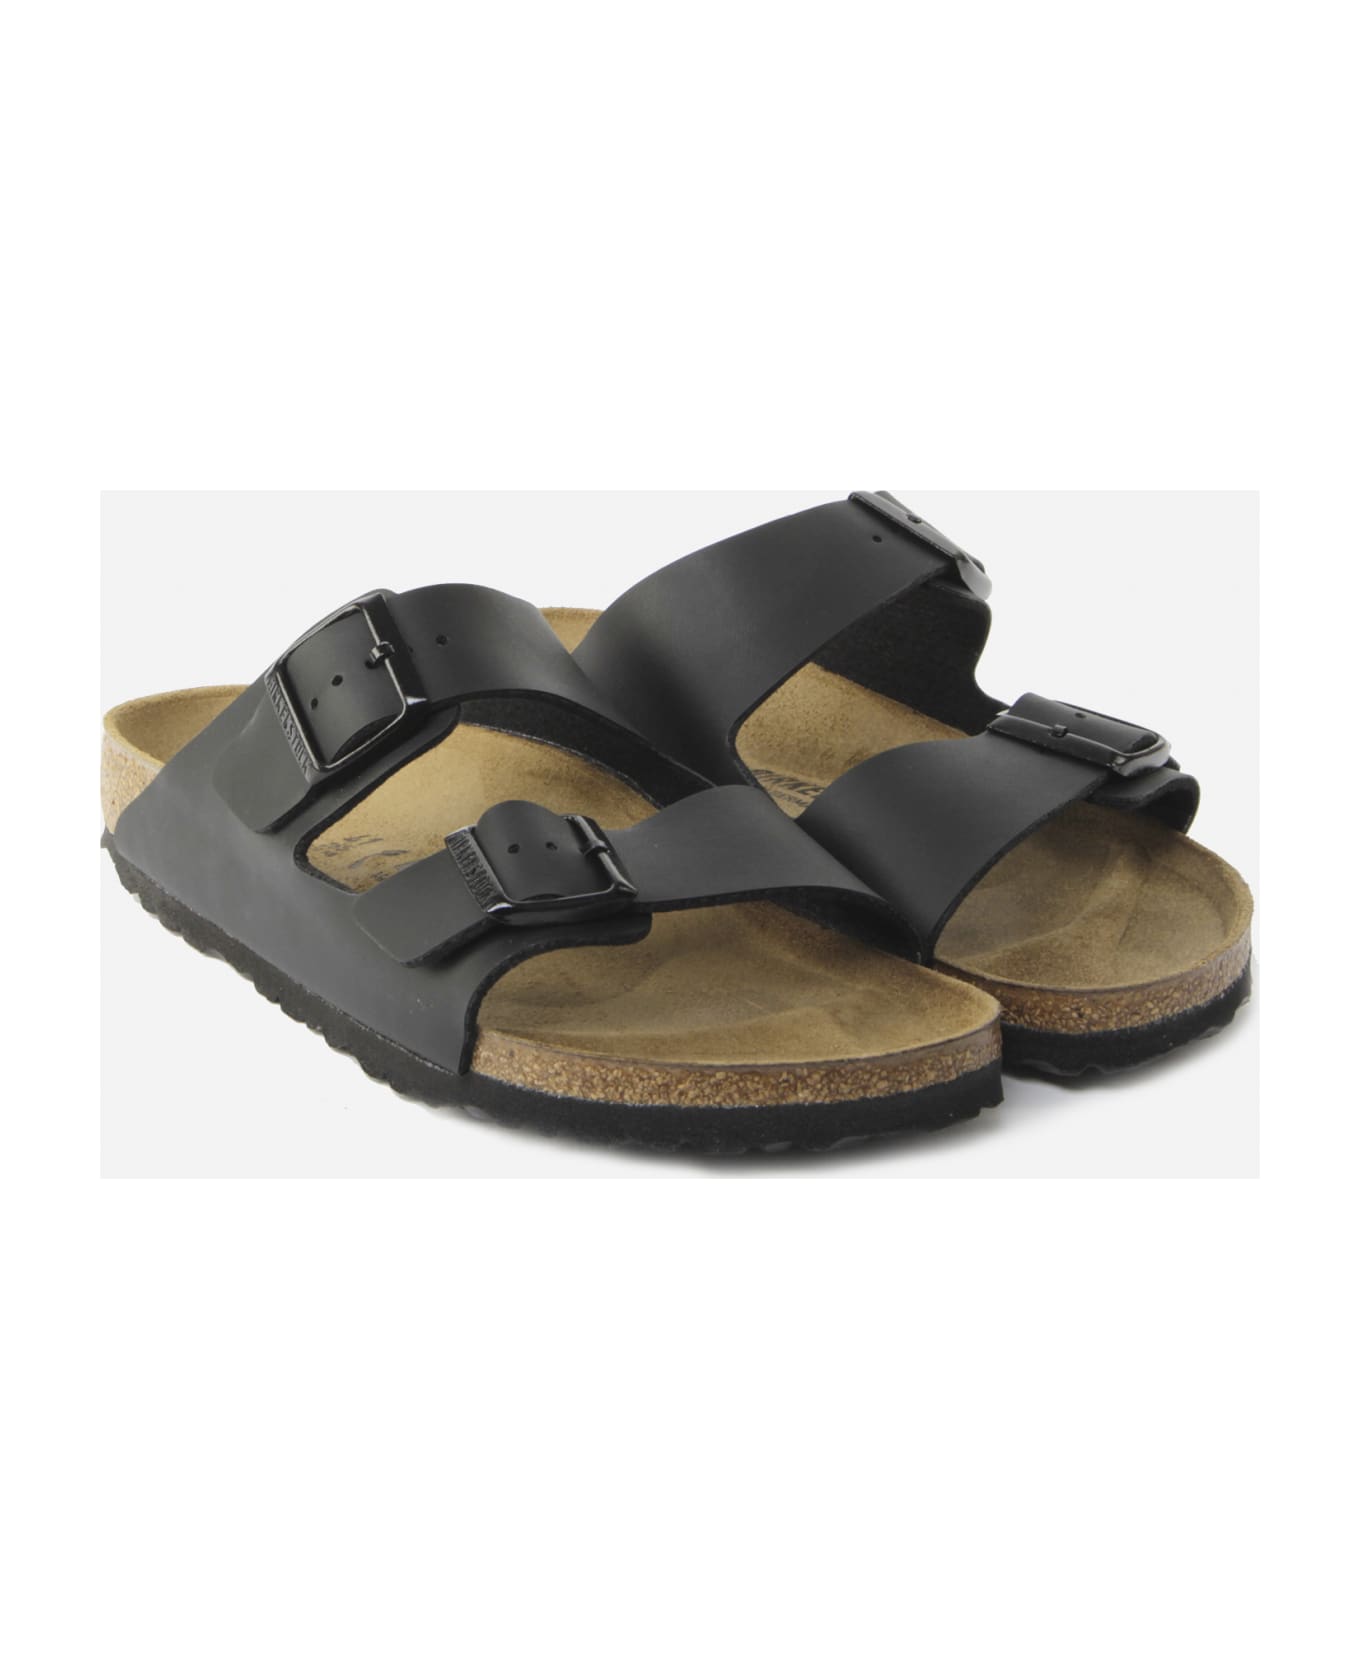 Birkenstock Leather Sandals With Double Strap - Black